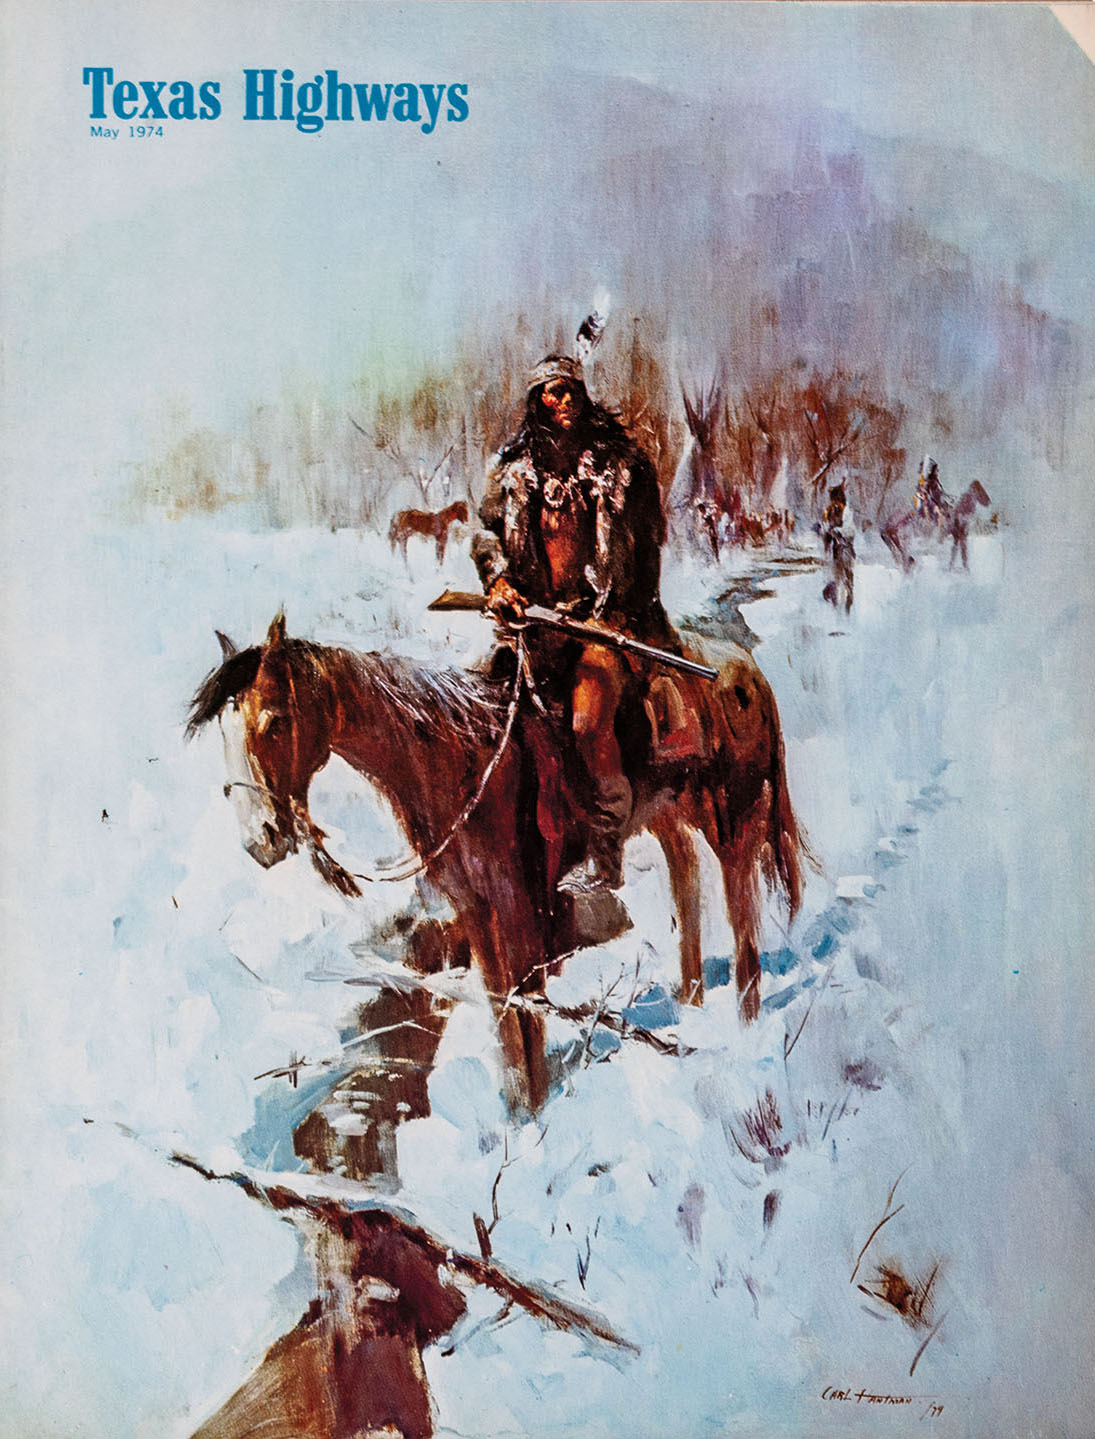 A vintage cover of Texas Highways Magazine with a Native American sitting on horseback in a snowy scene